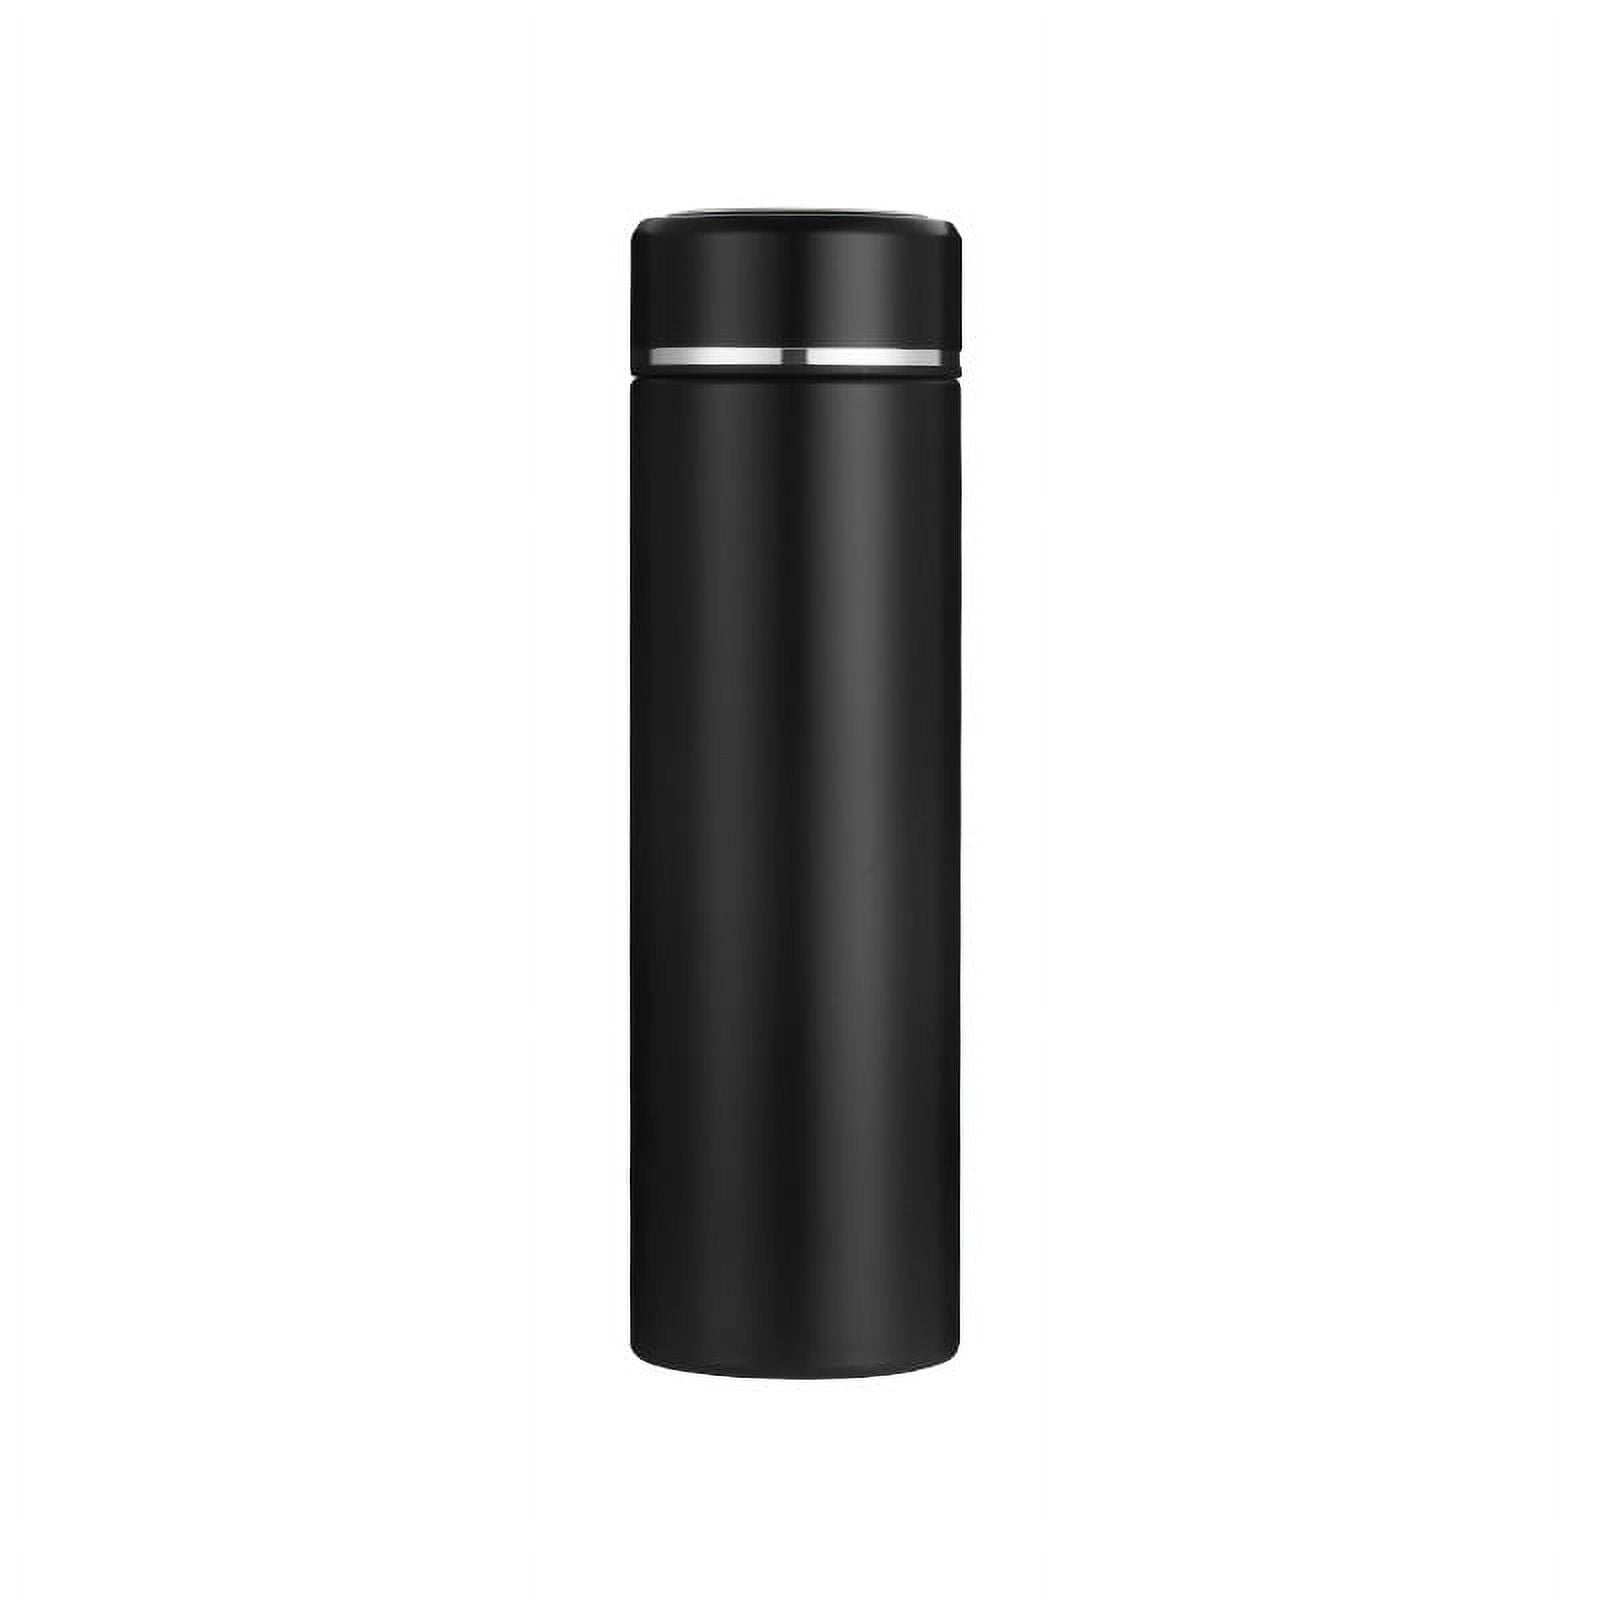  Yeti Thermos Thermos for hot Food Thermos Therm 500ml Keep  Water Bottle Thermal Thermos Temperature Display Vacuum Insulated Cup  Stainless Steel Travel Coffee Mug Thermos Flask (Color : Black) : לבית